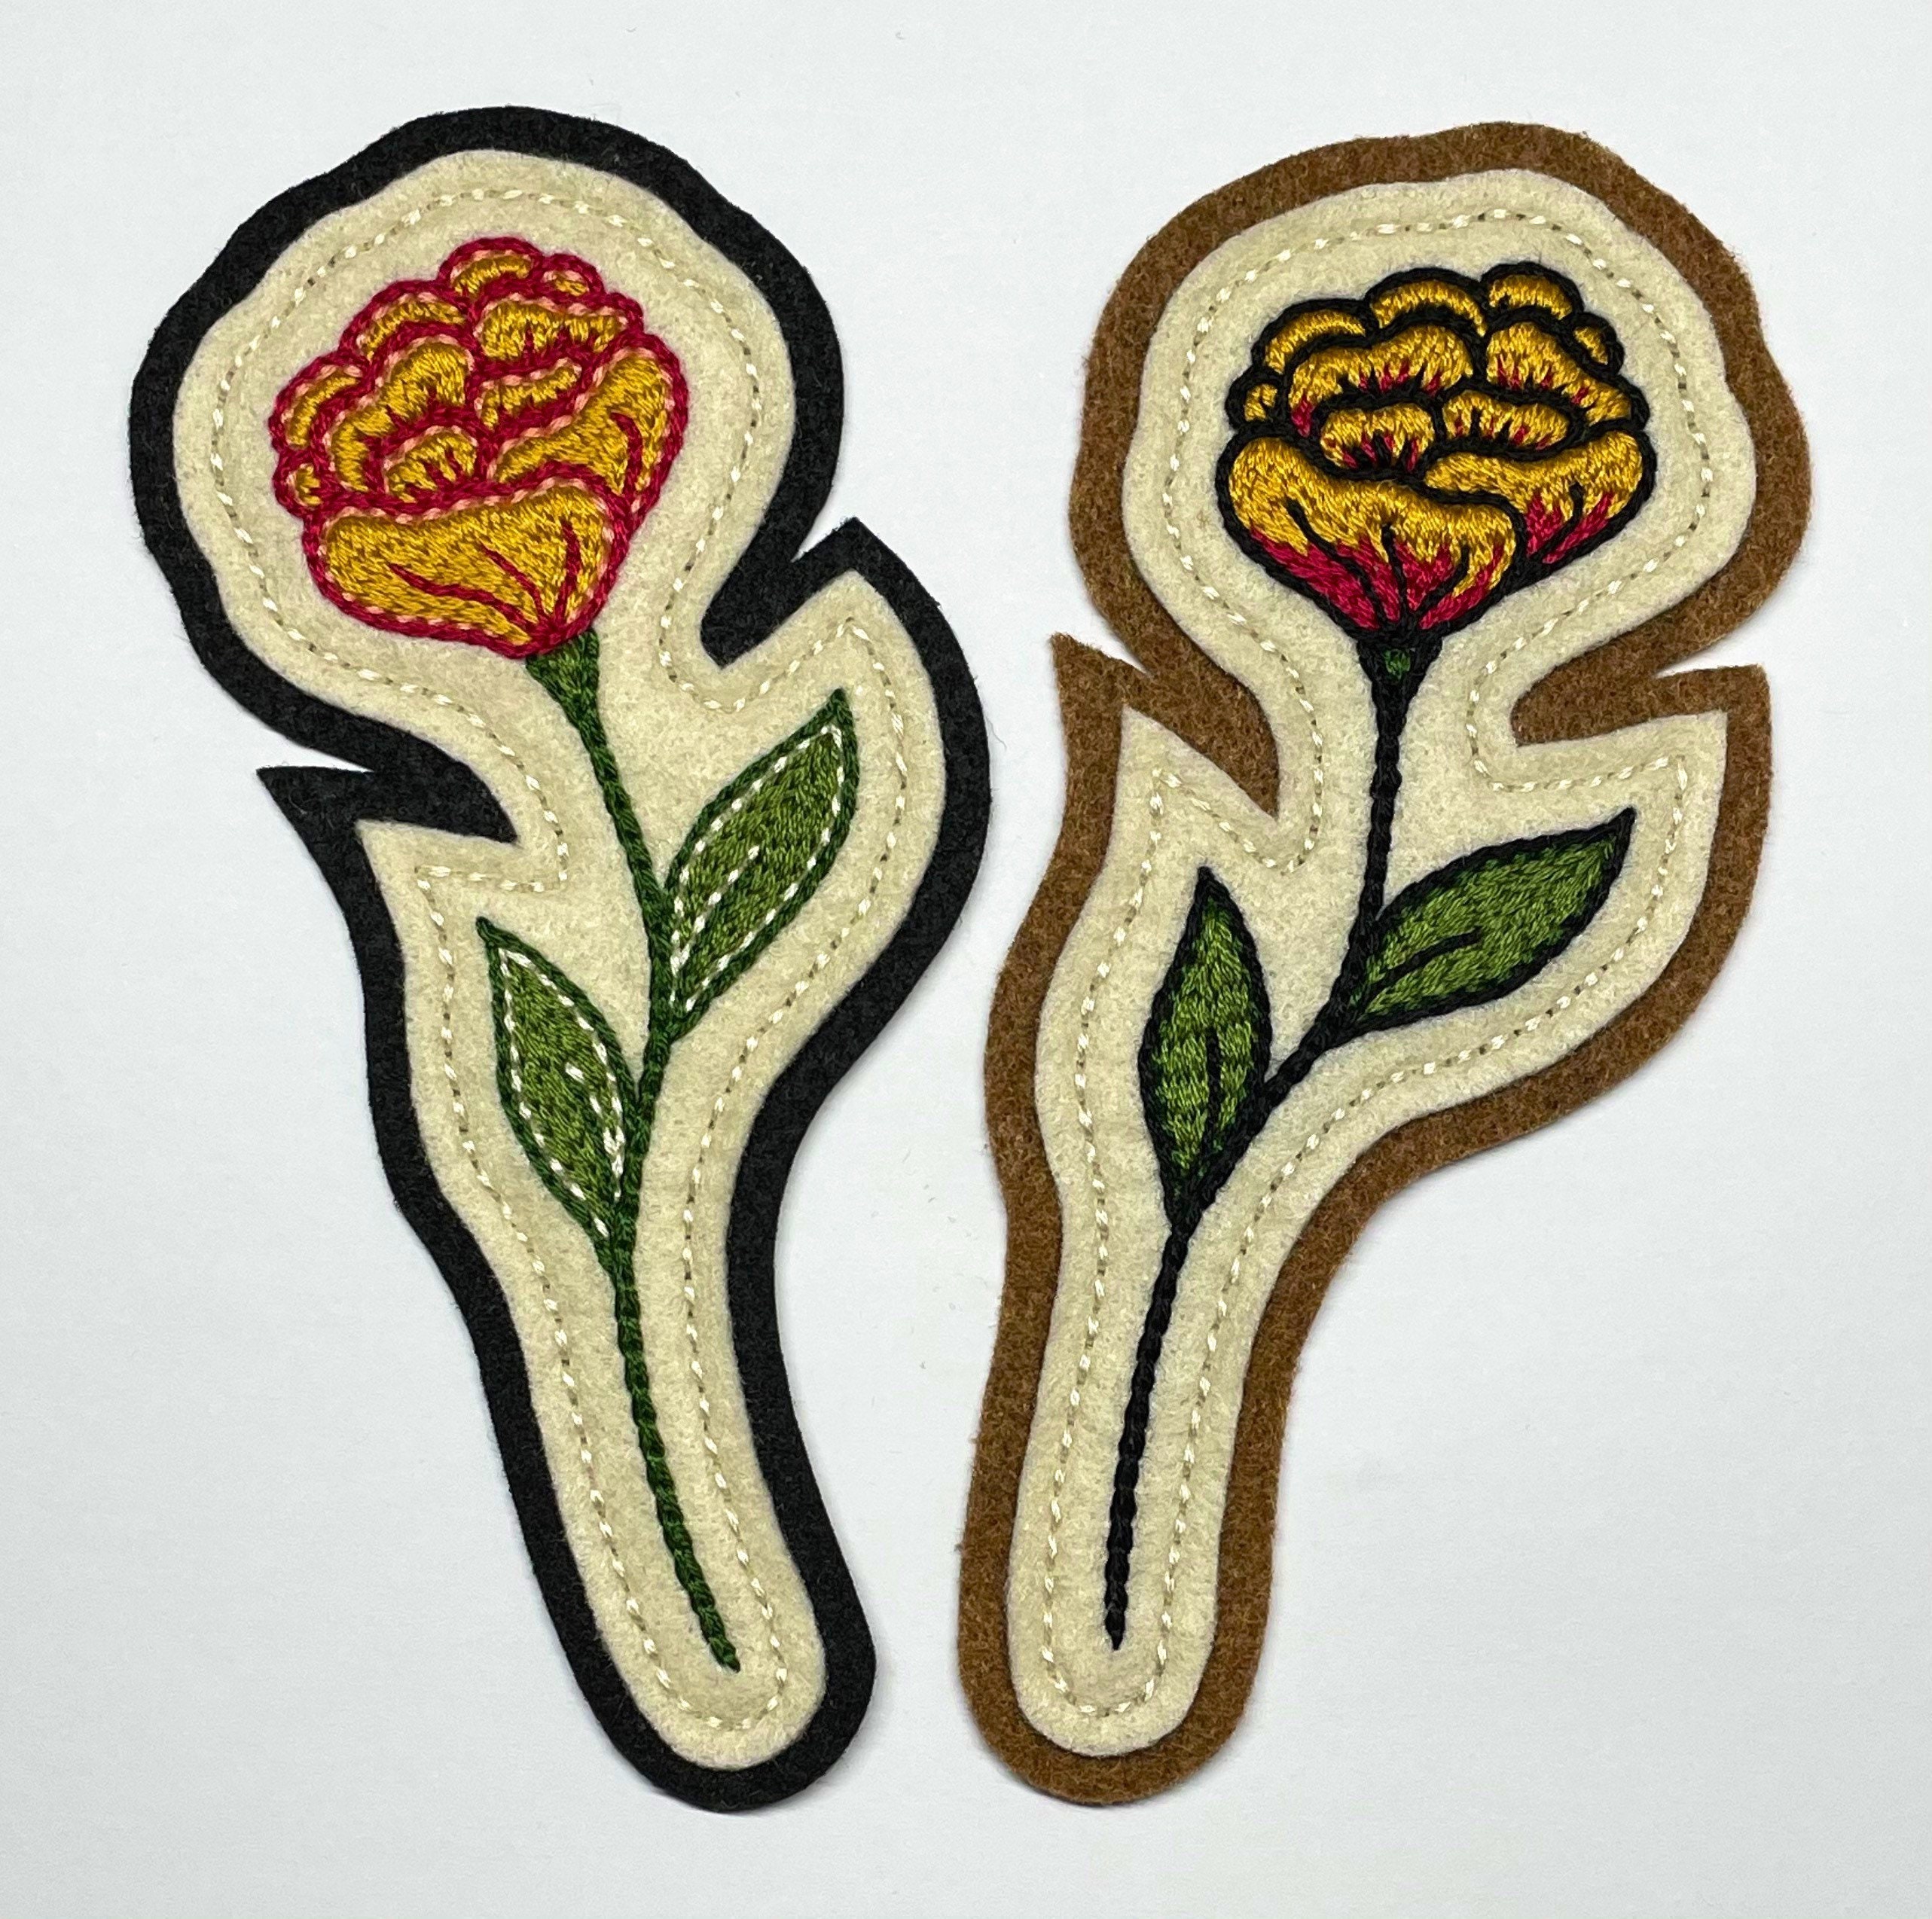 Handmade Hand Embroidered Off White And Black Tan Felt Patch Yellow Dark Fuschia Marigold Vintage Style Traditional Tattoo Flash